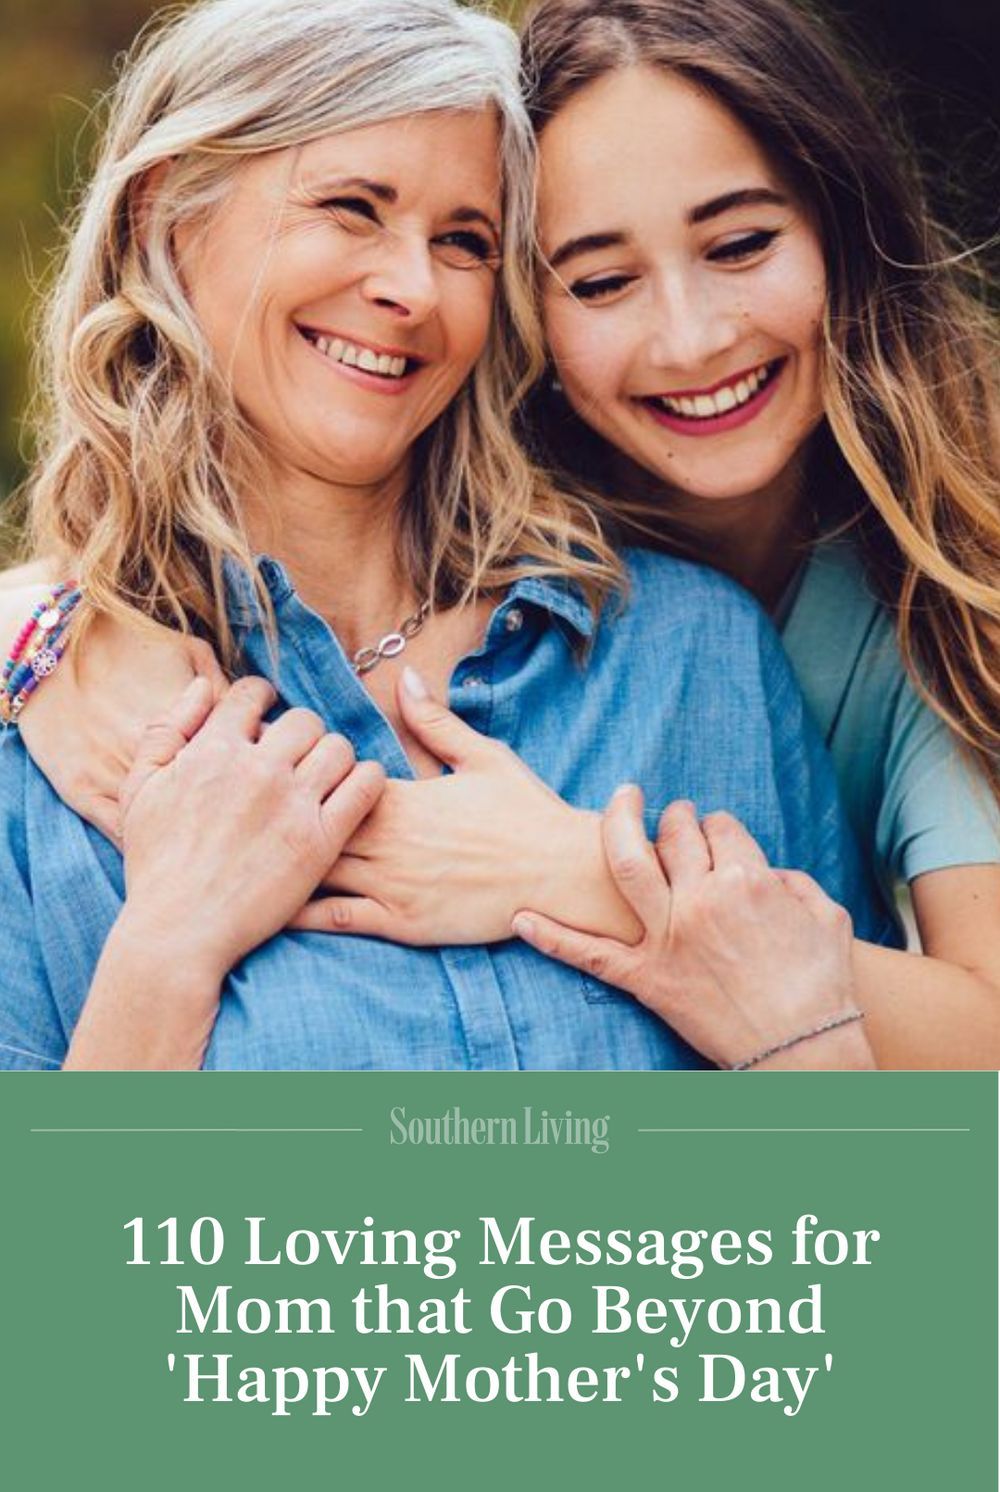 110 Loving Messages for Mom that Go Beyond 'Happy Mother's Day'